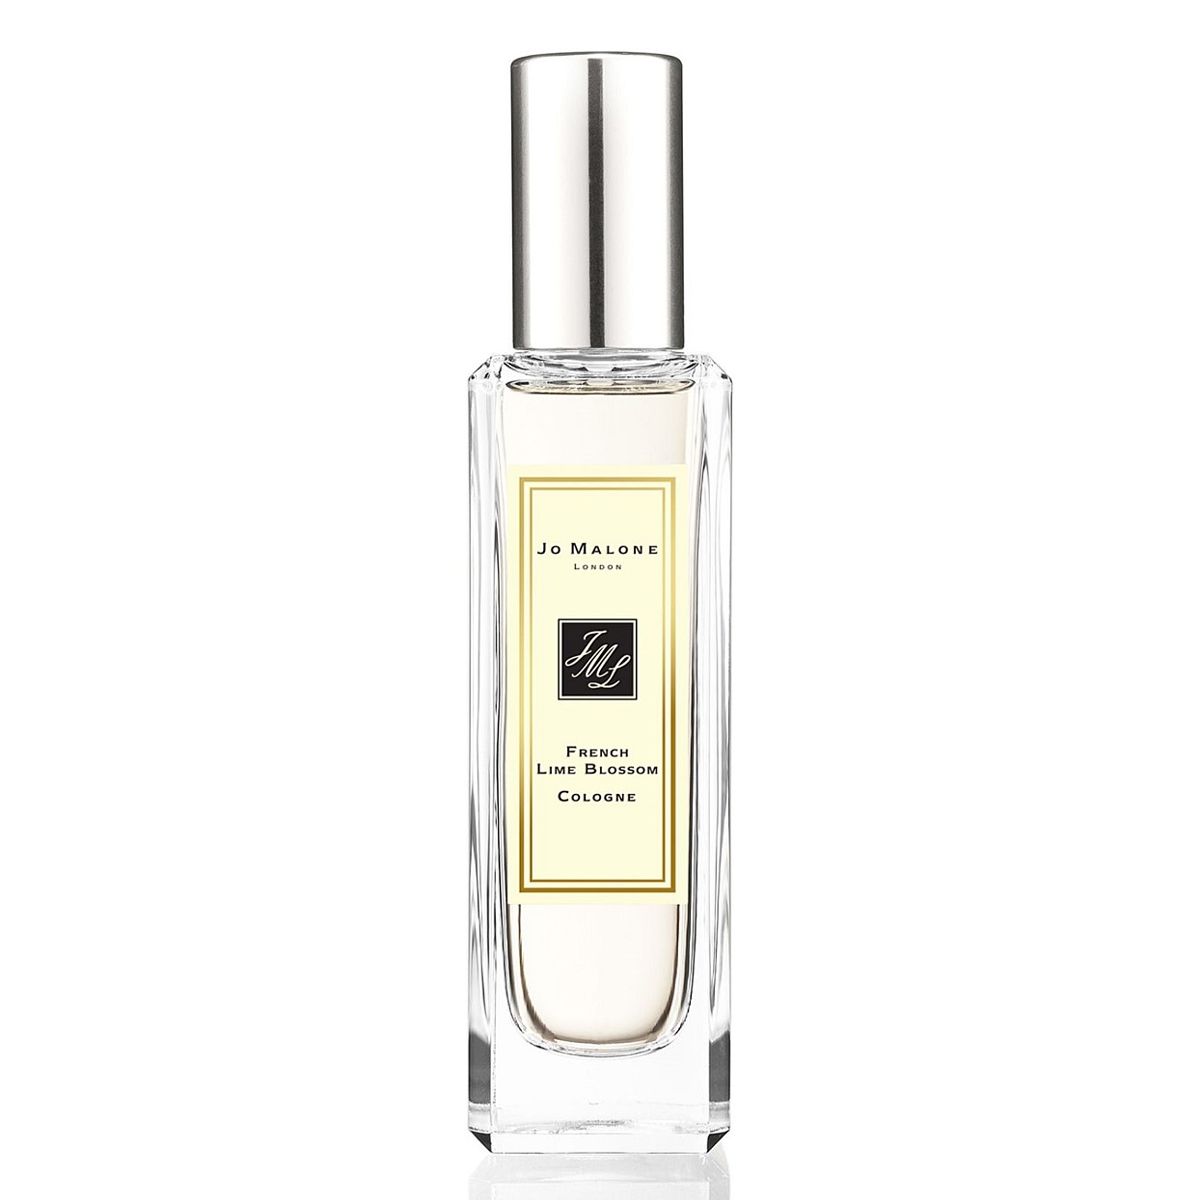  Jo Malone London French Lime Blossom Cologne 